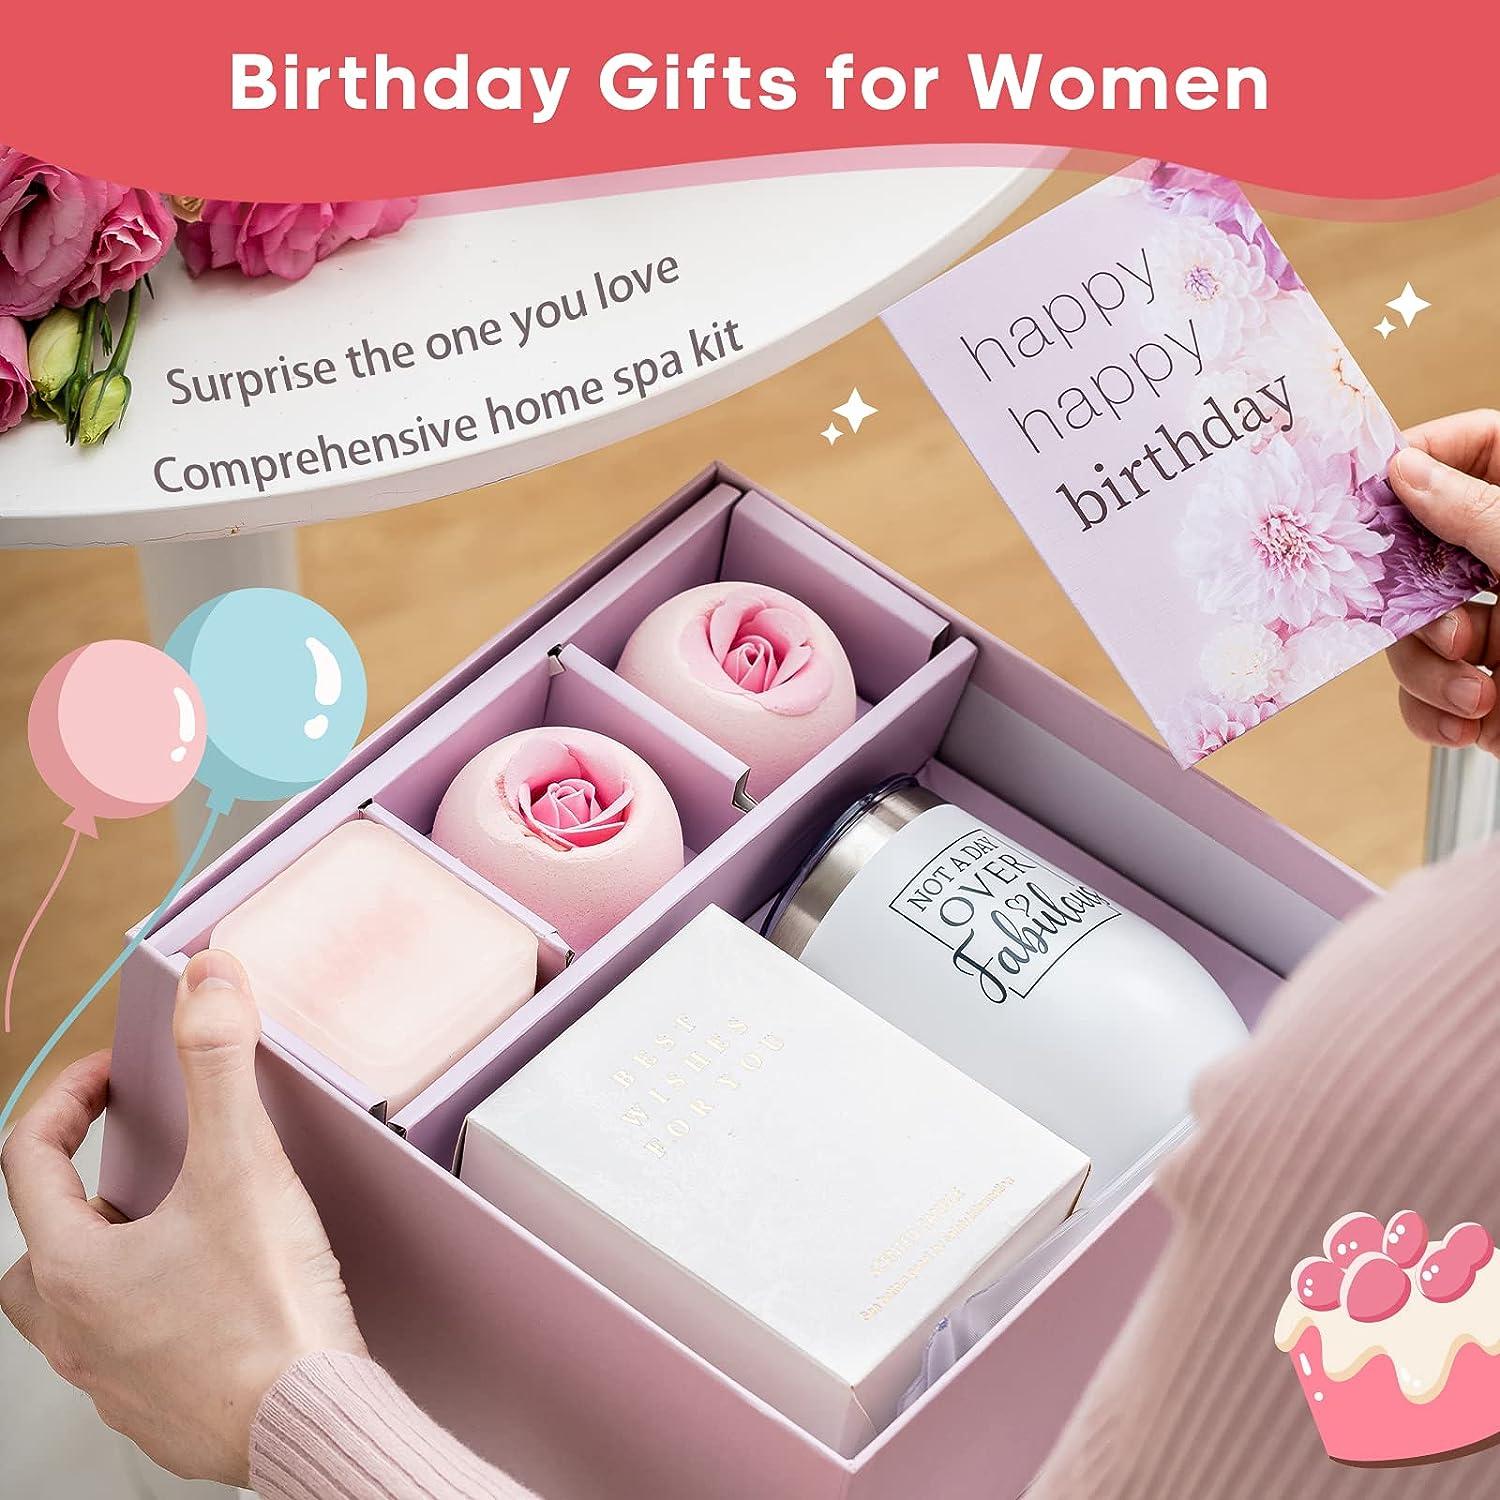 Sawnfay Luxury Birthday Gifts for Her, Unique Birthday Gifts for Women Mom  Friend Sister Wife, Happy Birthday Box for Women, Gifts for Women Who Have